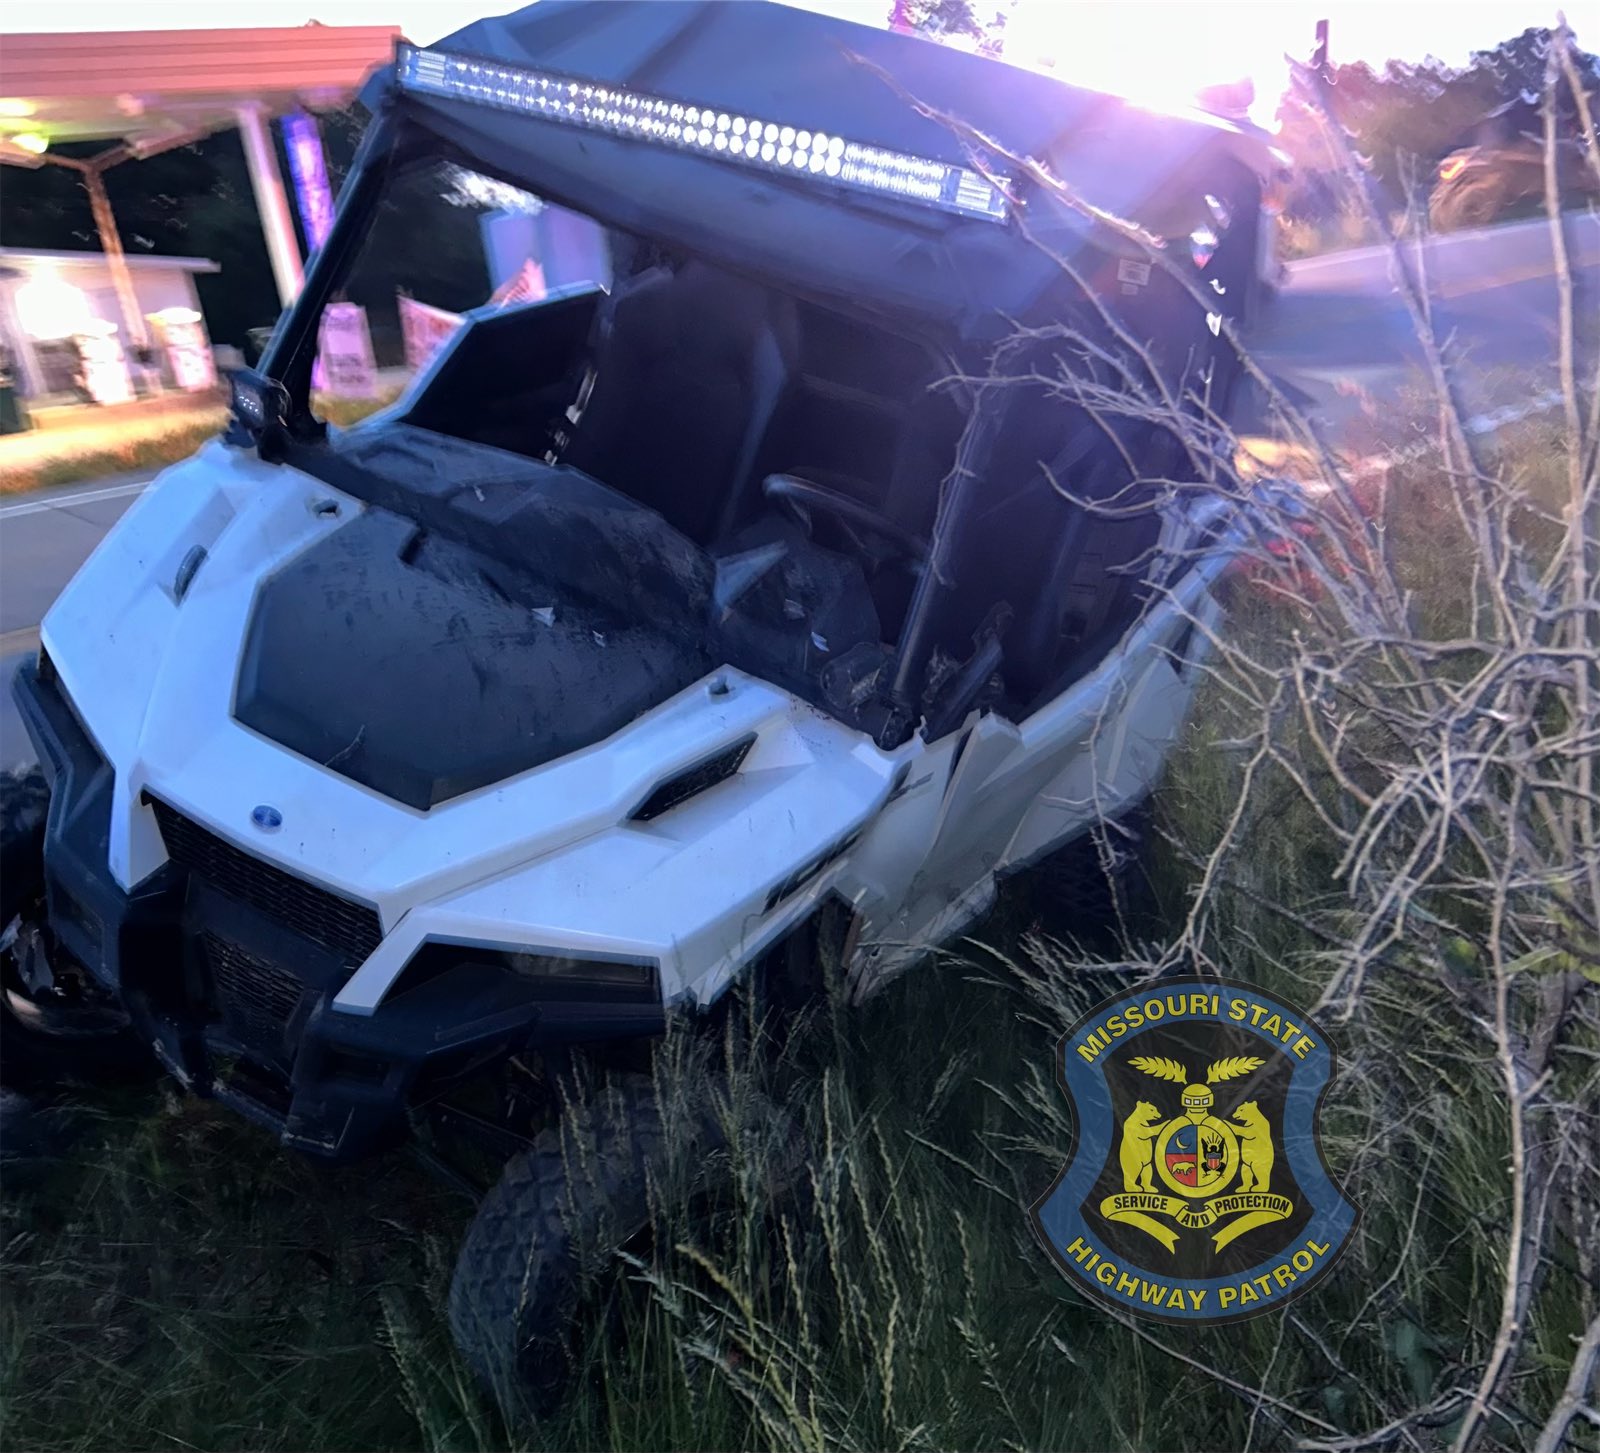 UTV driver arrested for DWI after serious collision in Miller County